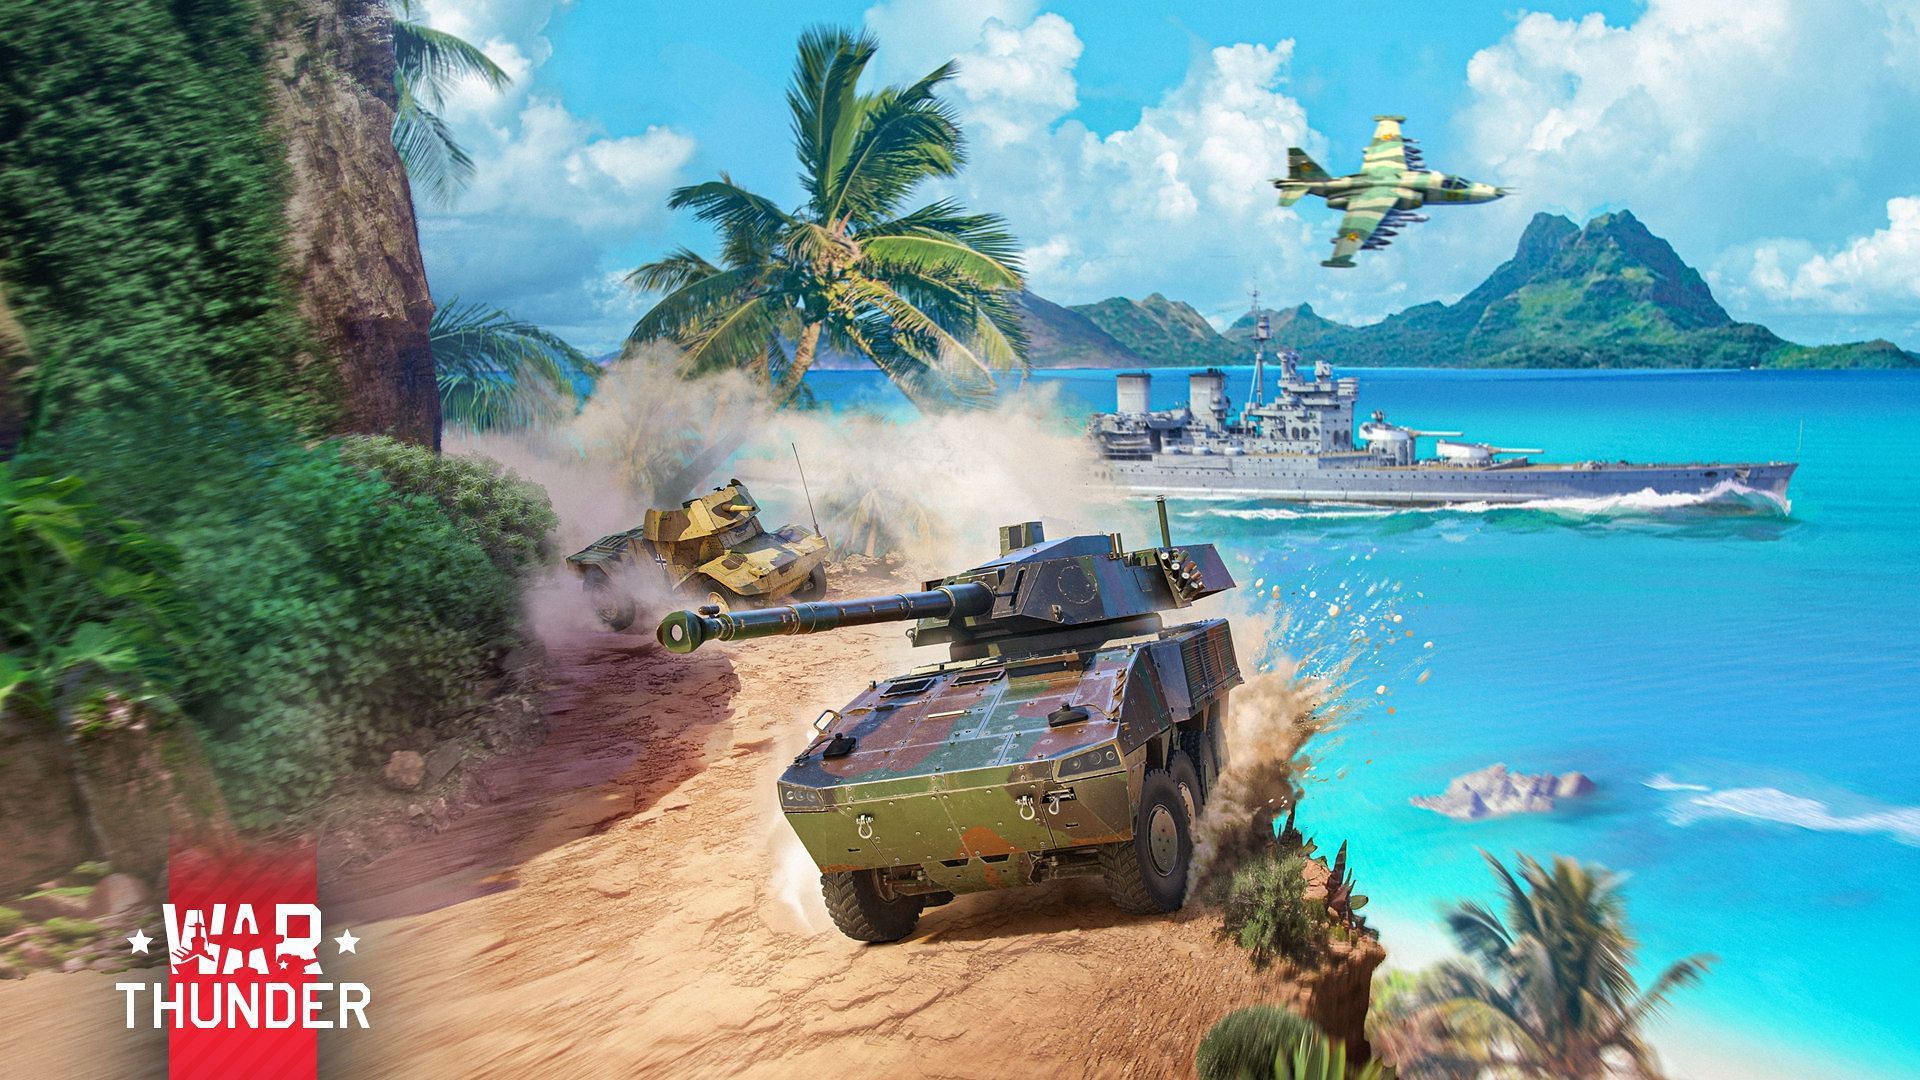 All War Thunder vehicles engaged in combat near a beach.